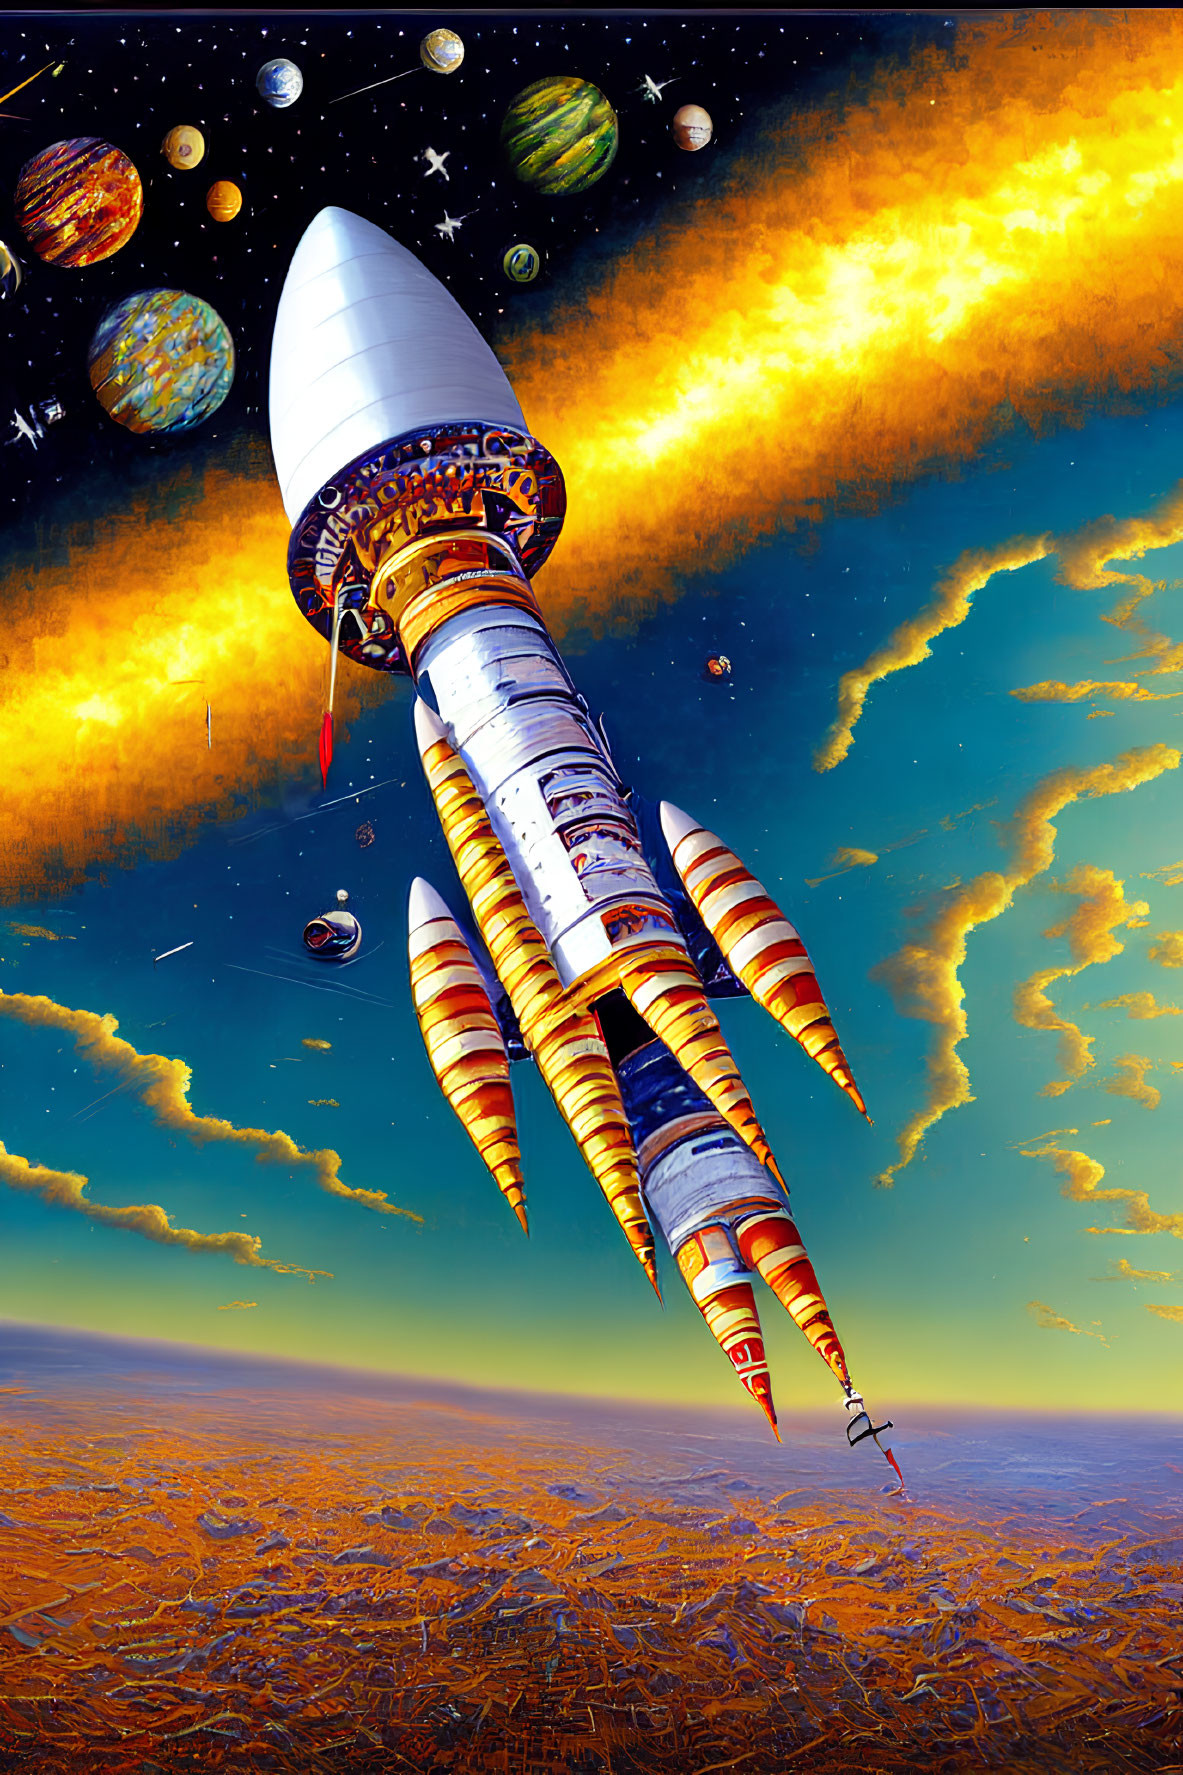 Colorful retro-futuristic rocket flying through starry sky and planets